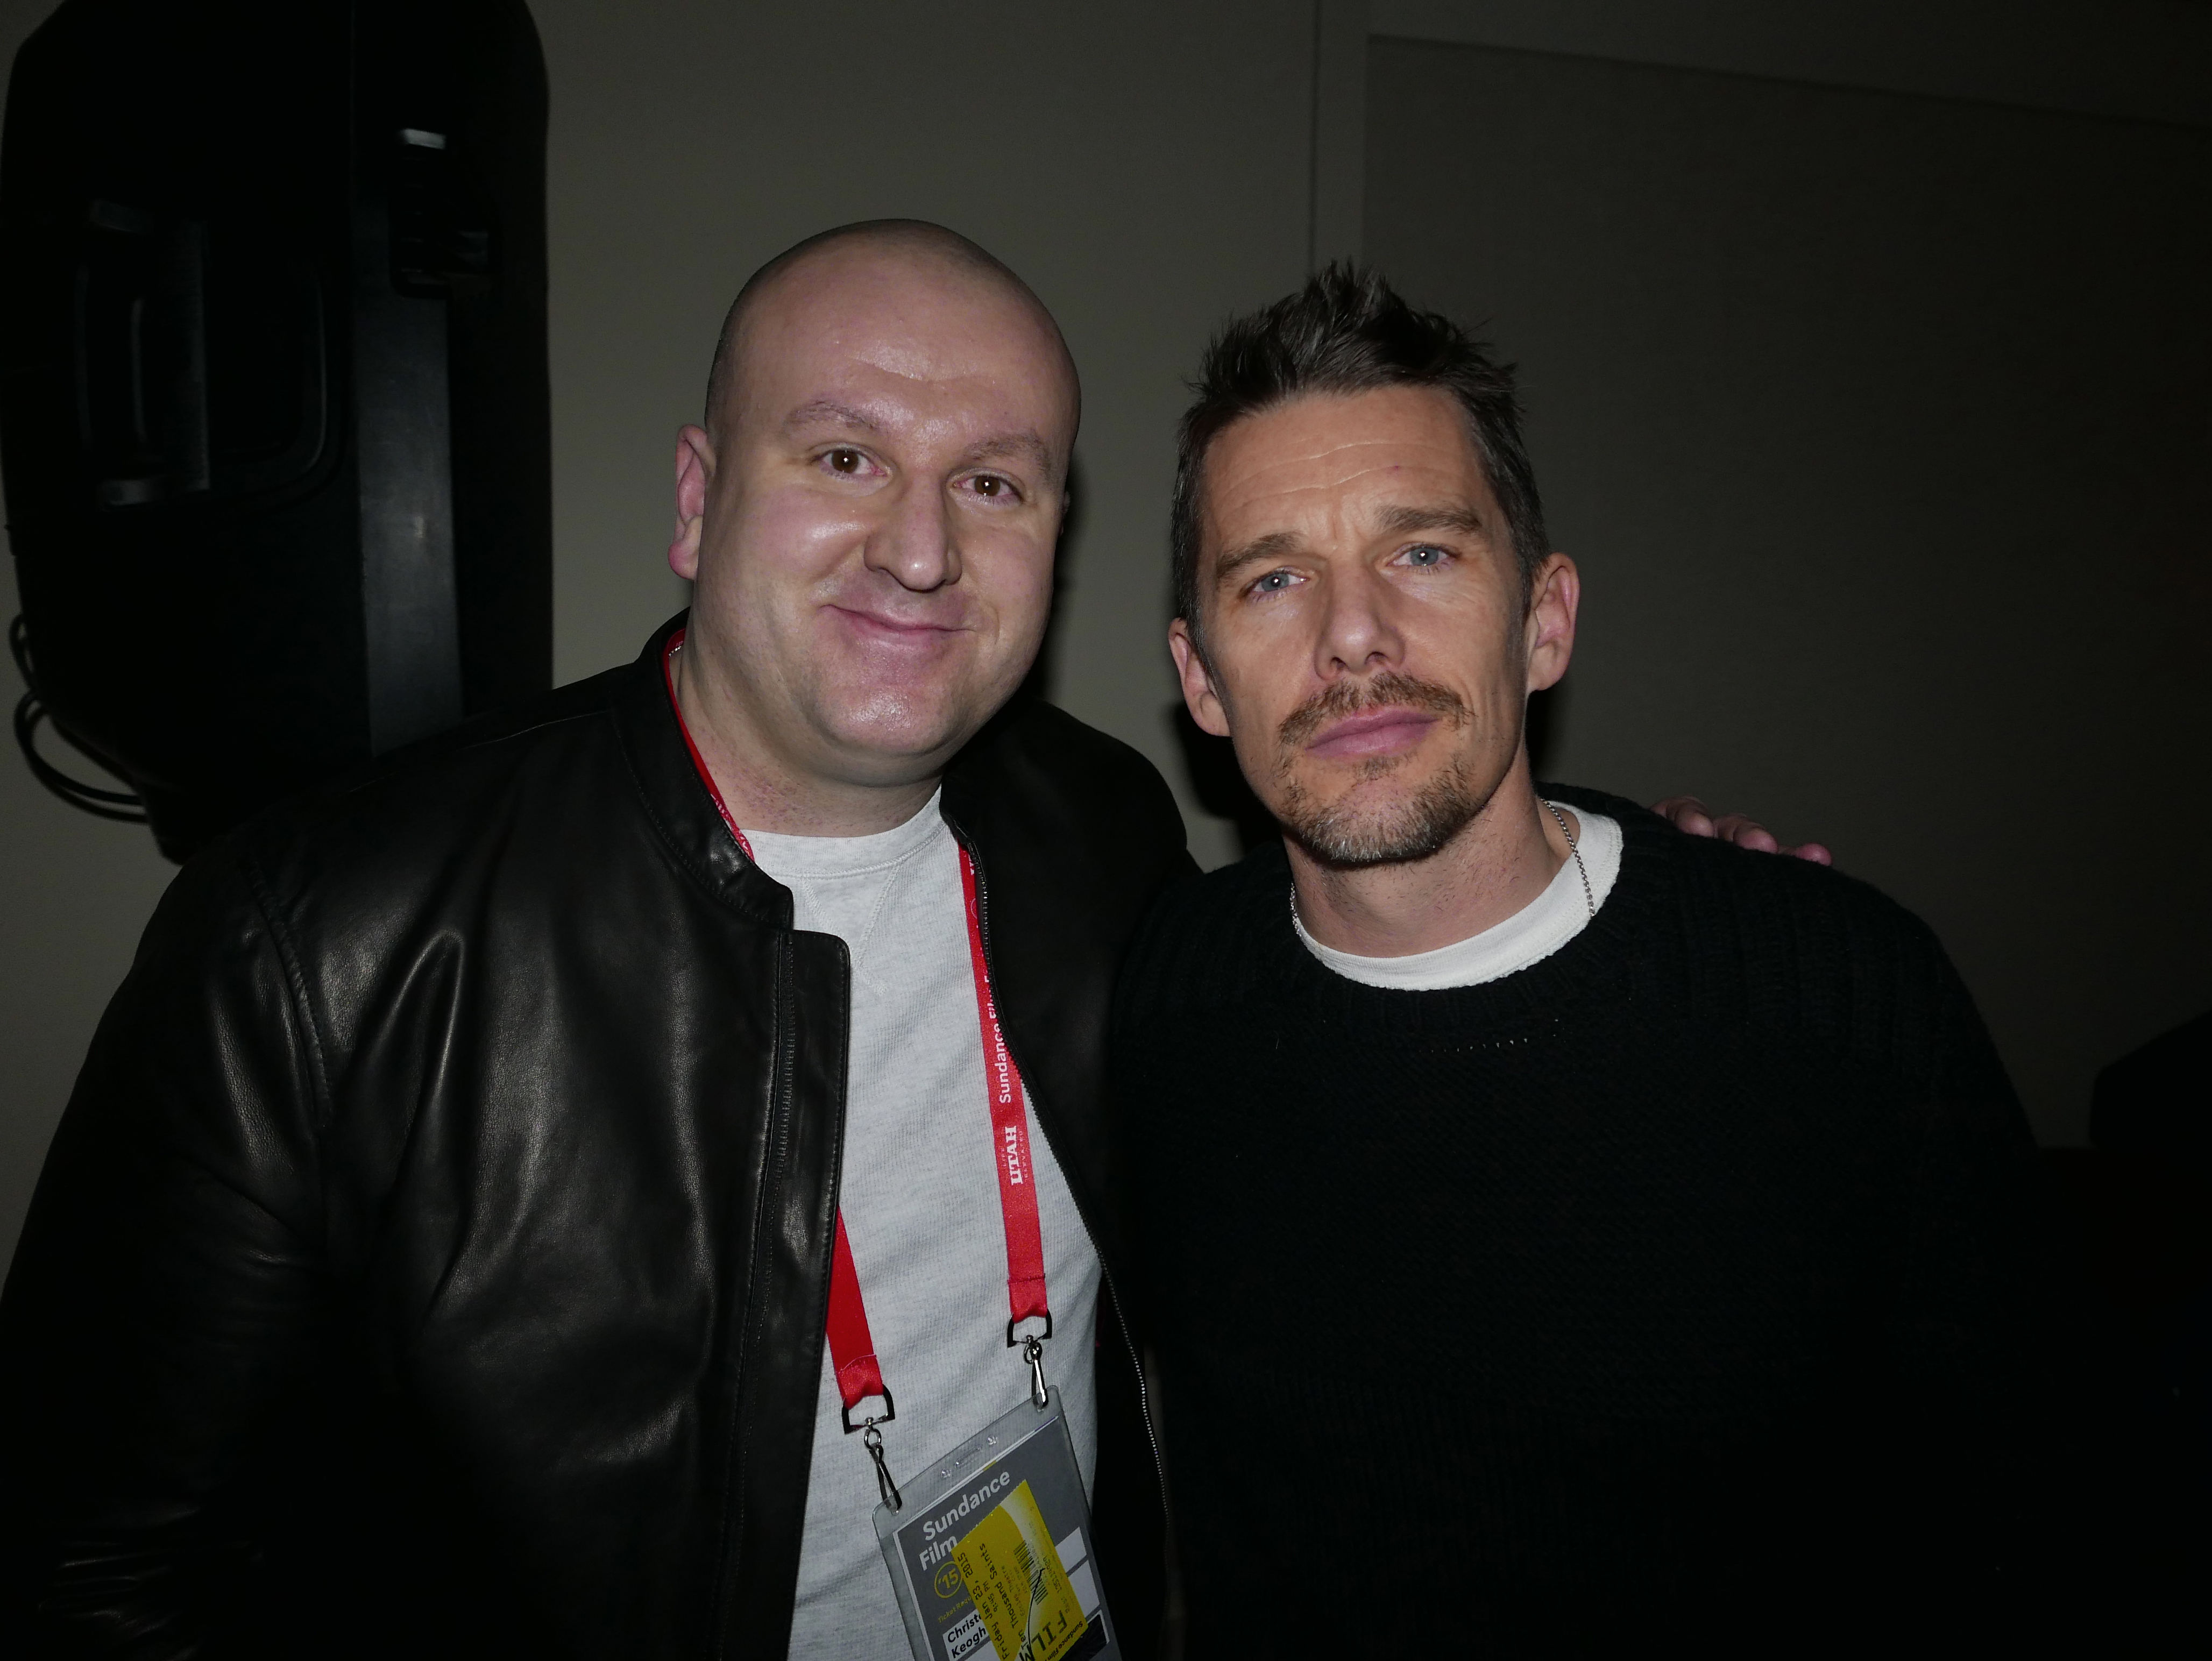 Associate Producer Christopher Keogh with Ten Thousand Saints star Ethan Hawke at the film premiere after party in Park City, Utah.